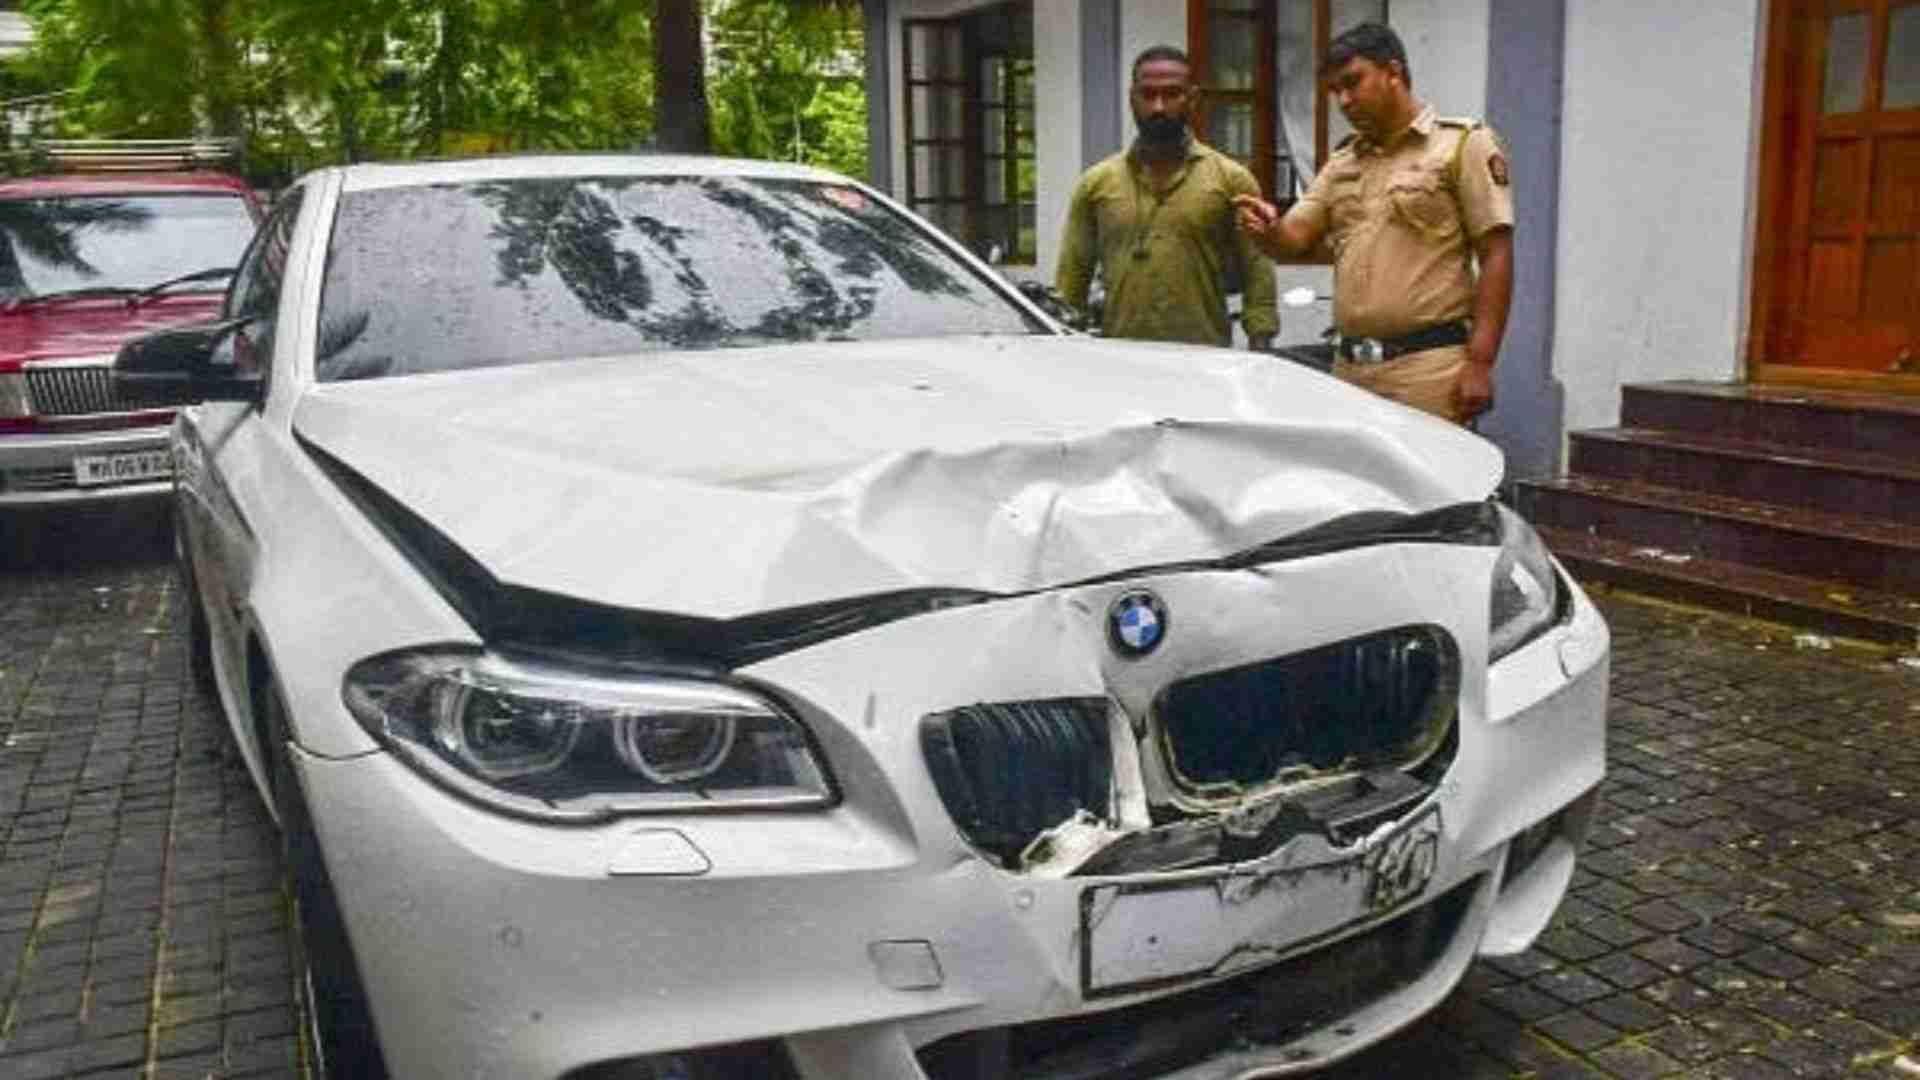 BMW Hit-and-Run Case: Prime Suspect Confesses To Driving; BMC Demolishes Bar’s Illegal Sections